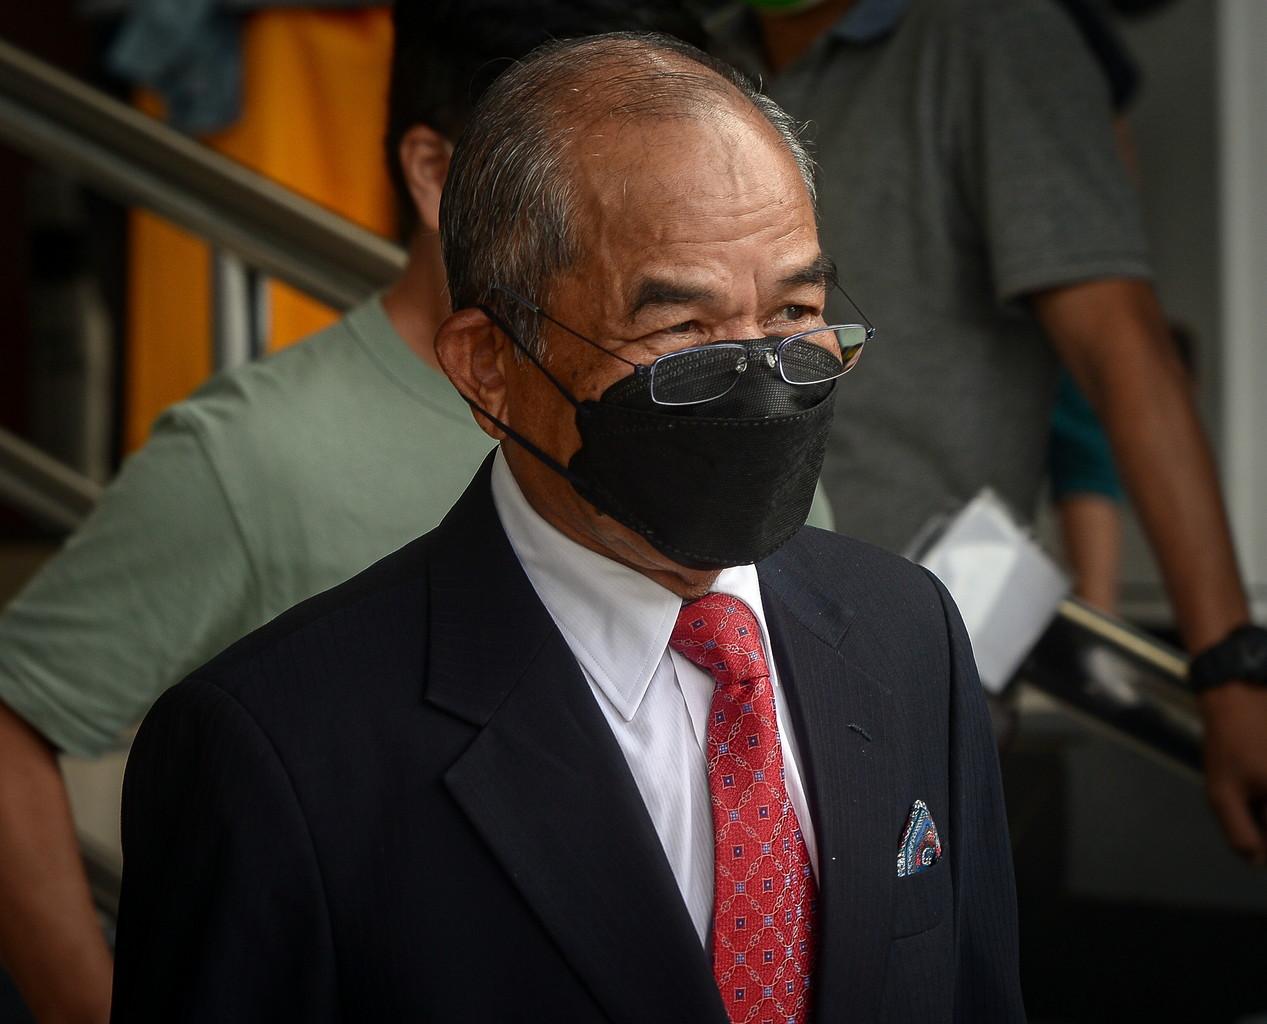 Former chief secretary to the government Mohd Sidek Hassan at the Kuala Lumpur court complex today. Photo: Bernama